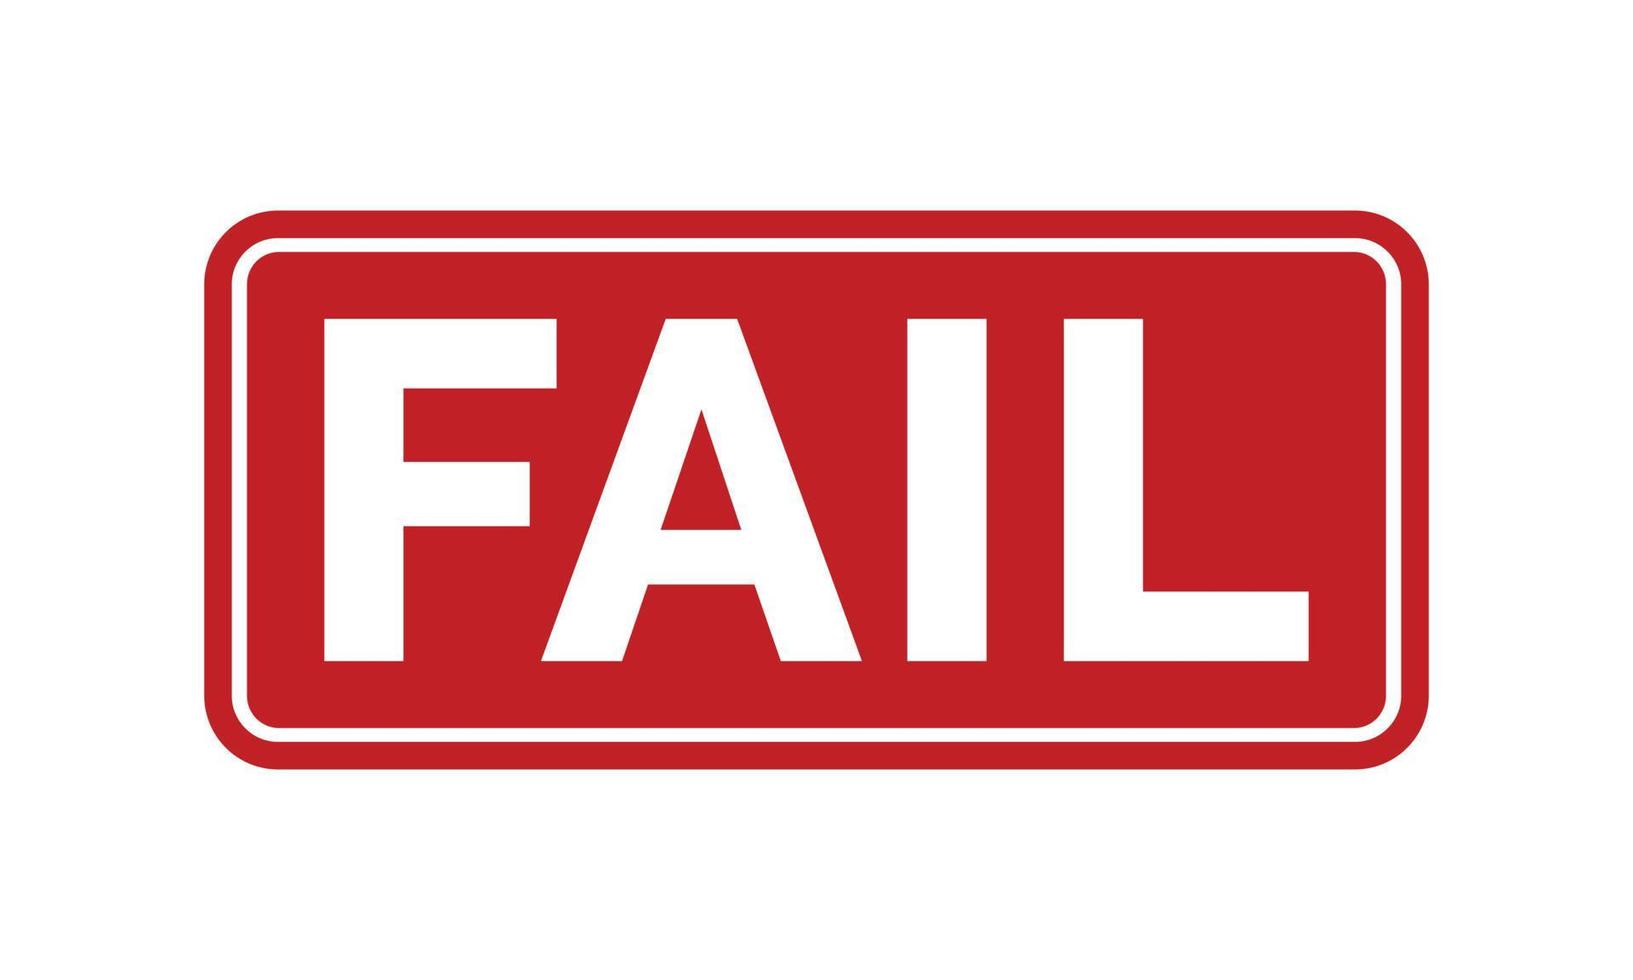 Fail Rubber Stamp. Red Fail Rubber Grunge Stamp Seal Vector Illustration - Vector